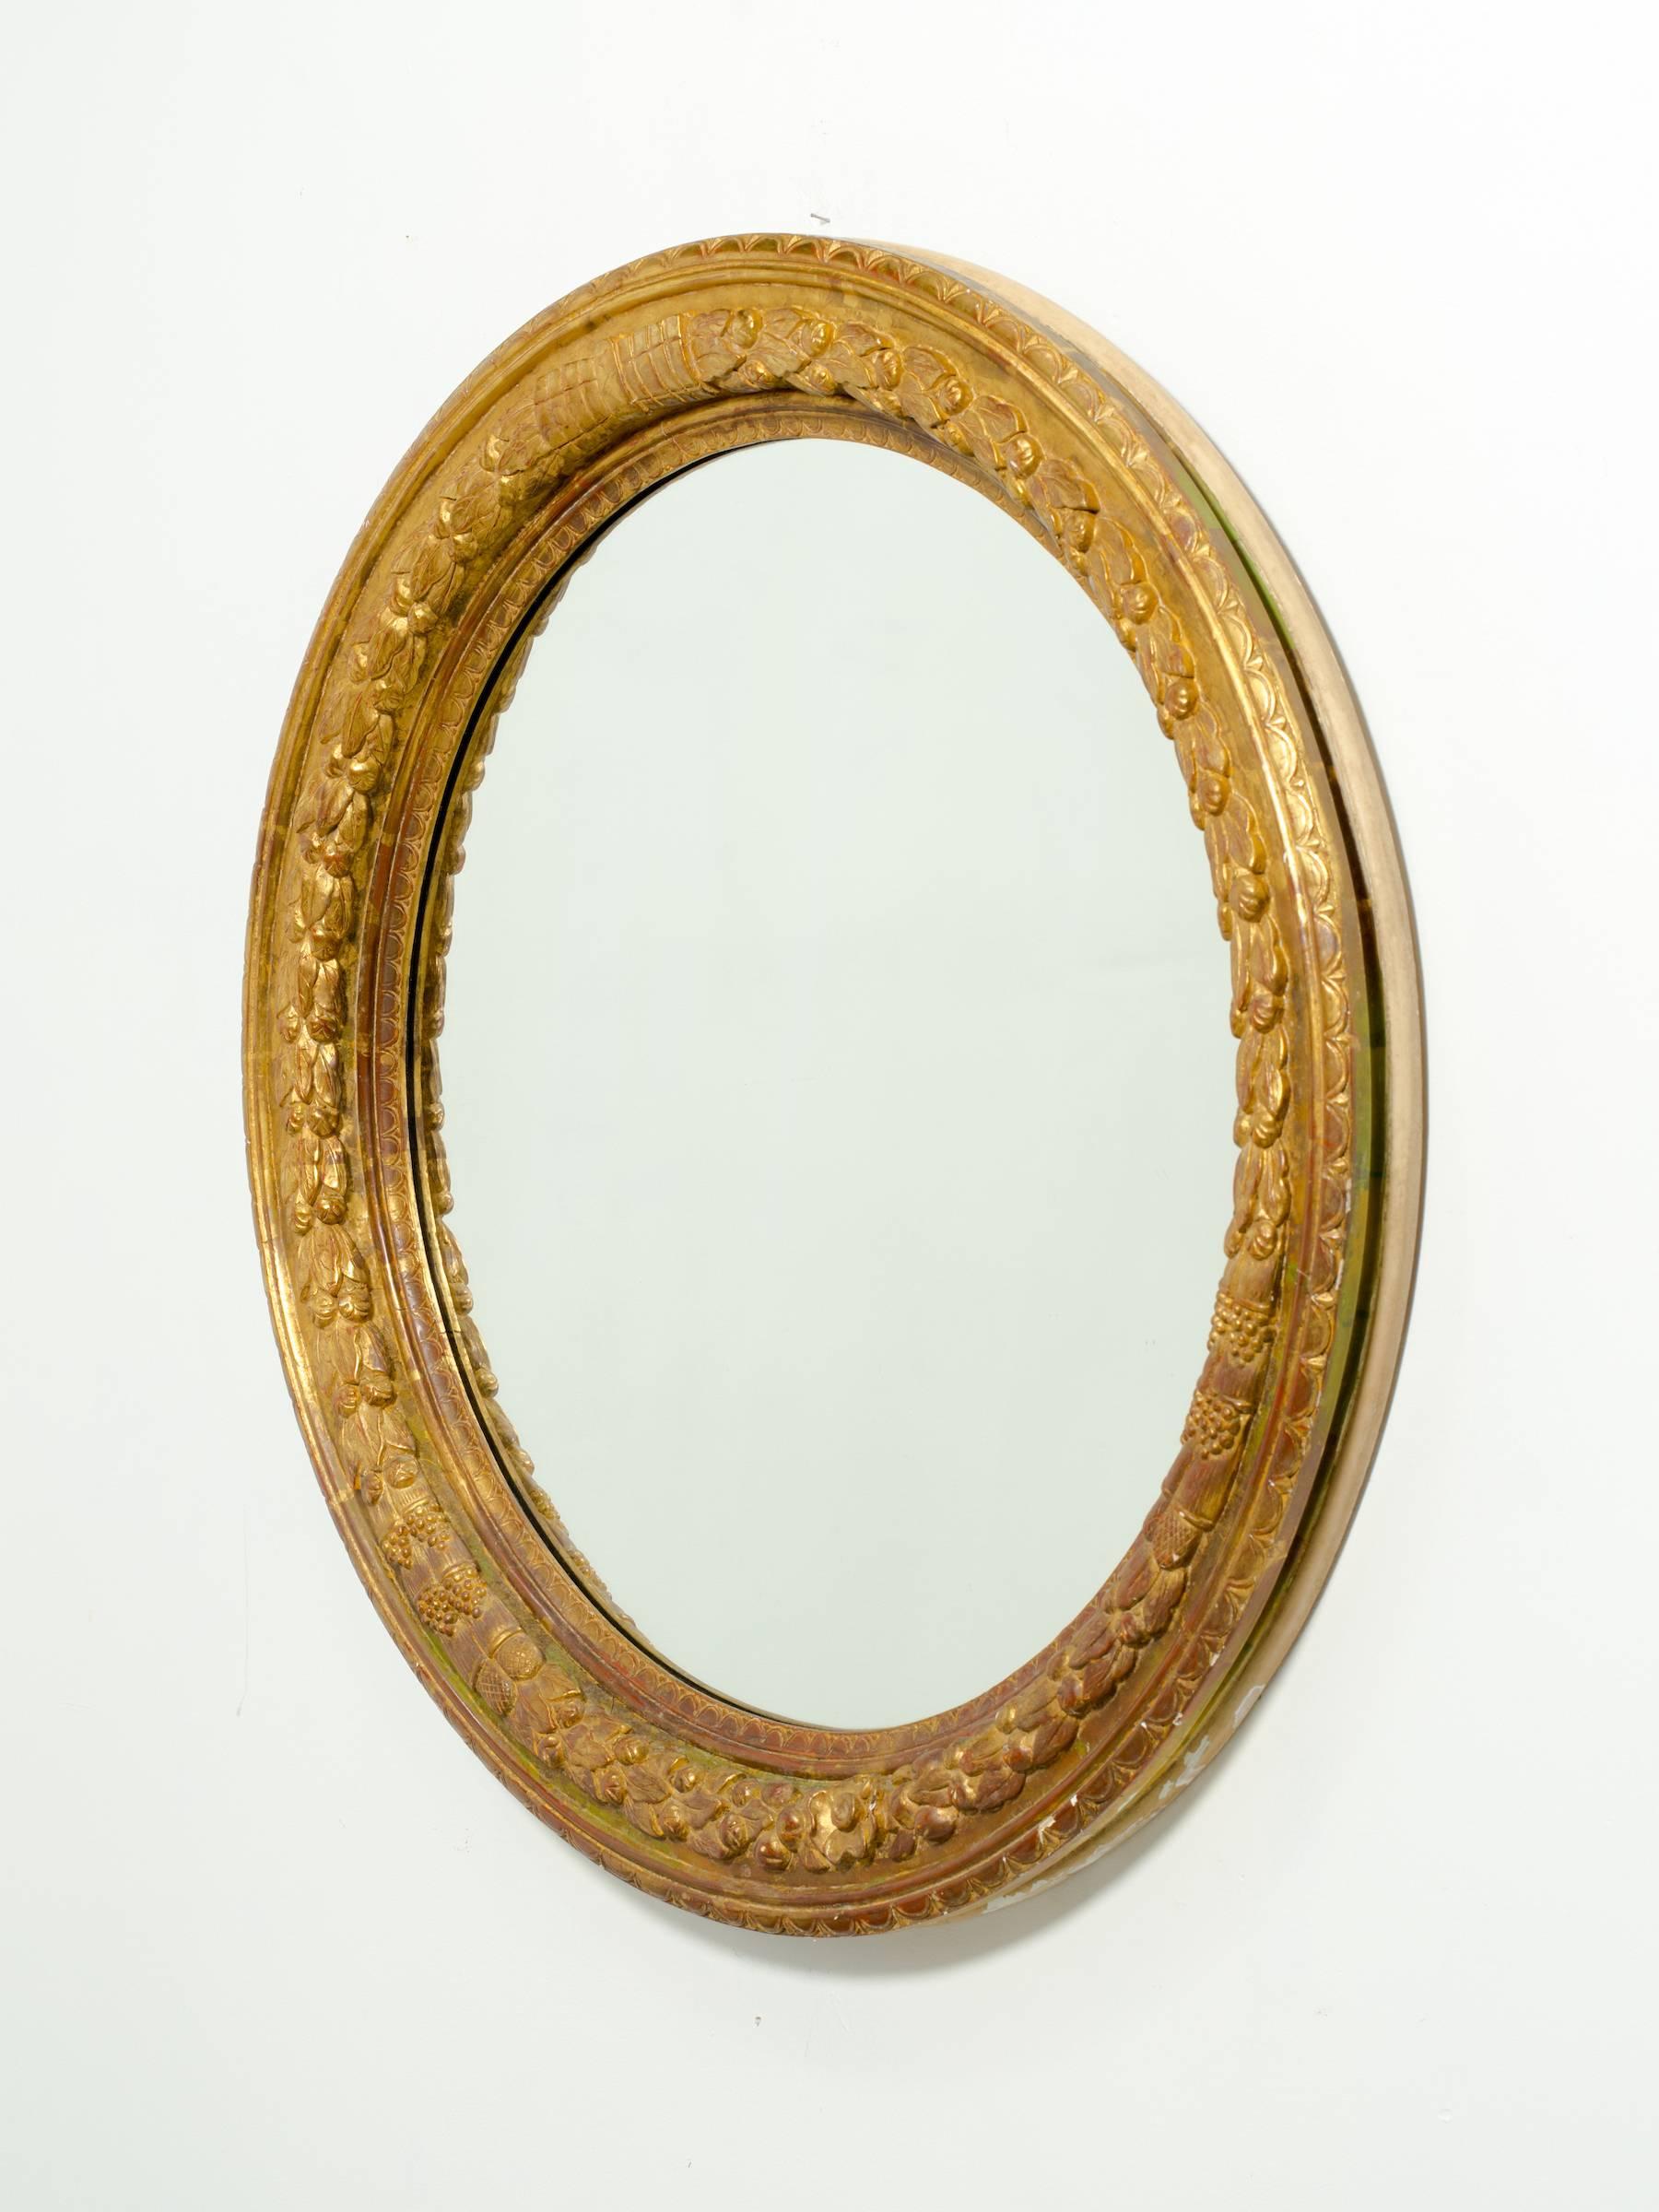 Great carved giltwood round mirror.